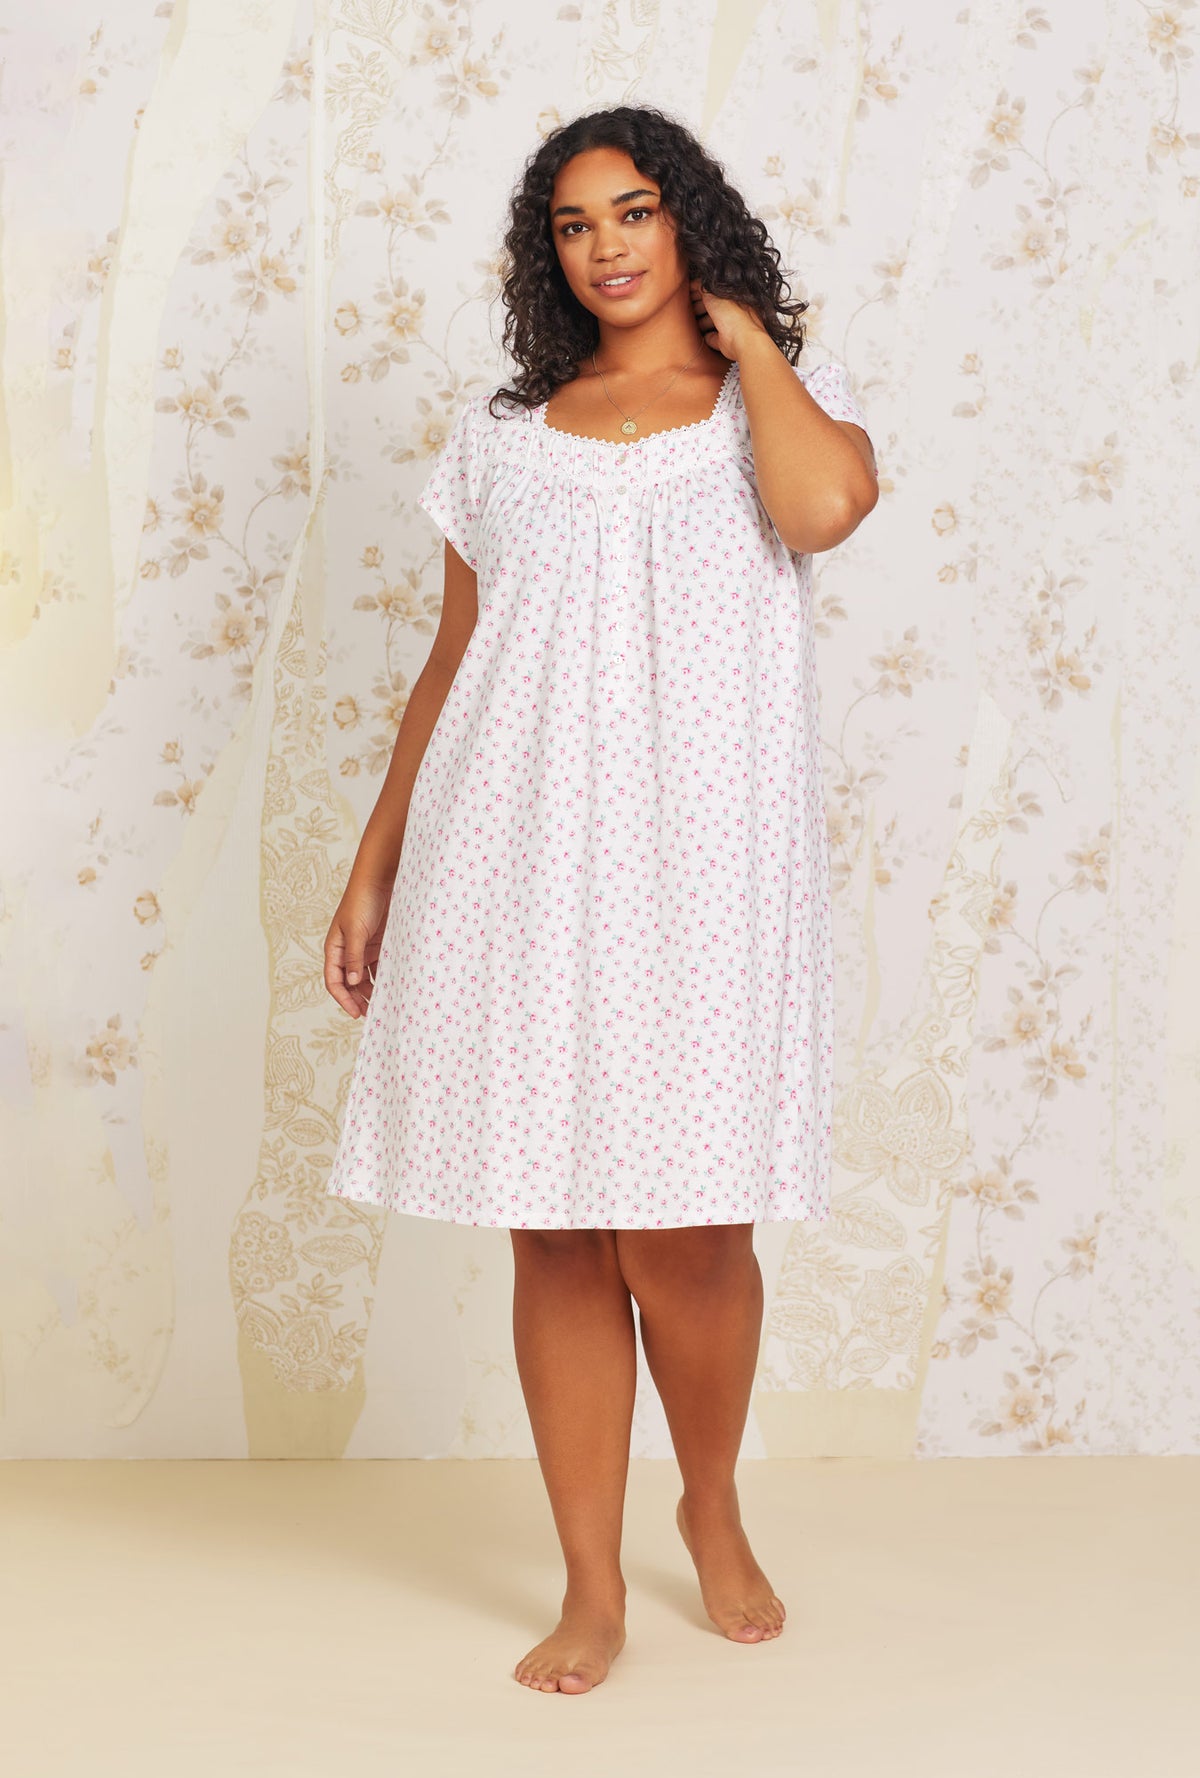 A lady wearing pink cap sleeve short cotton knit nightgown with joyful rose print.